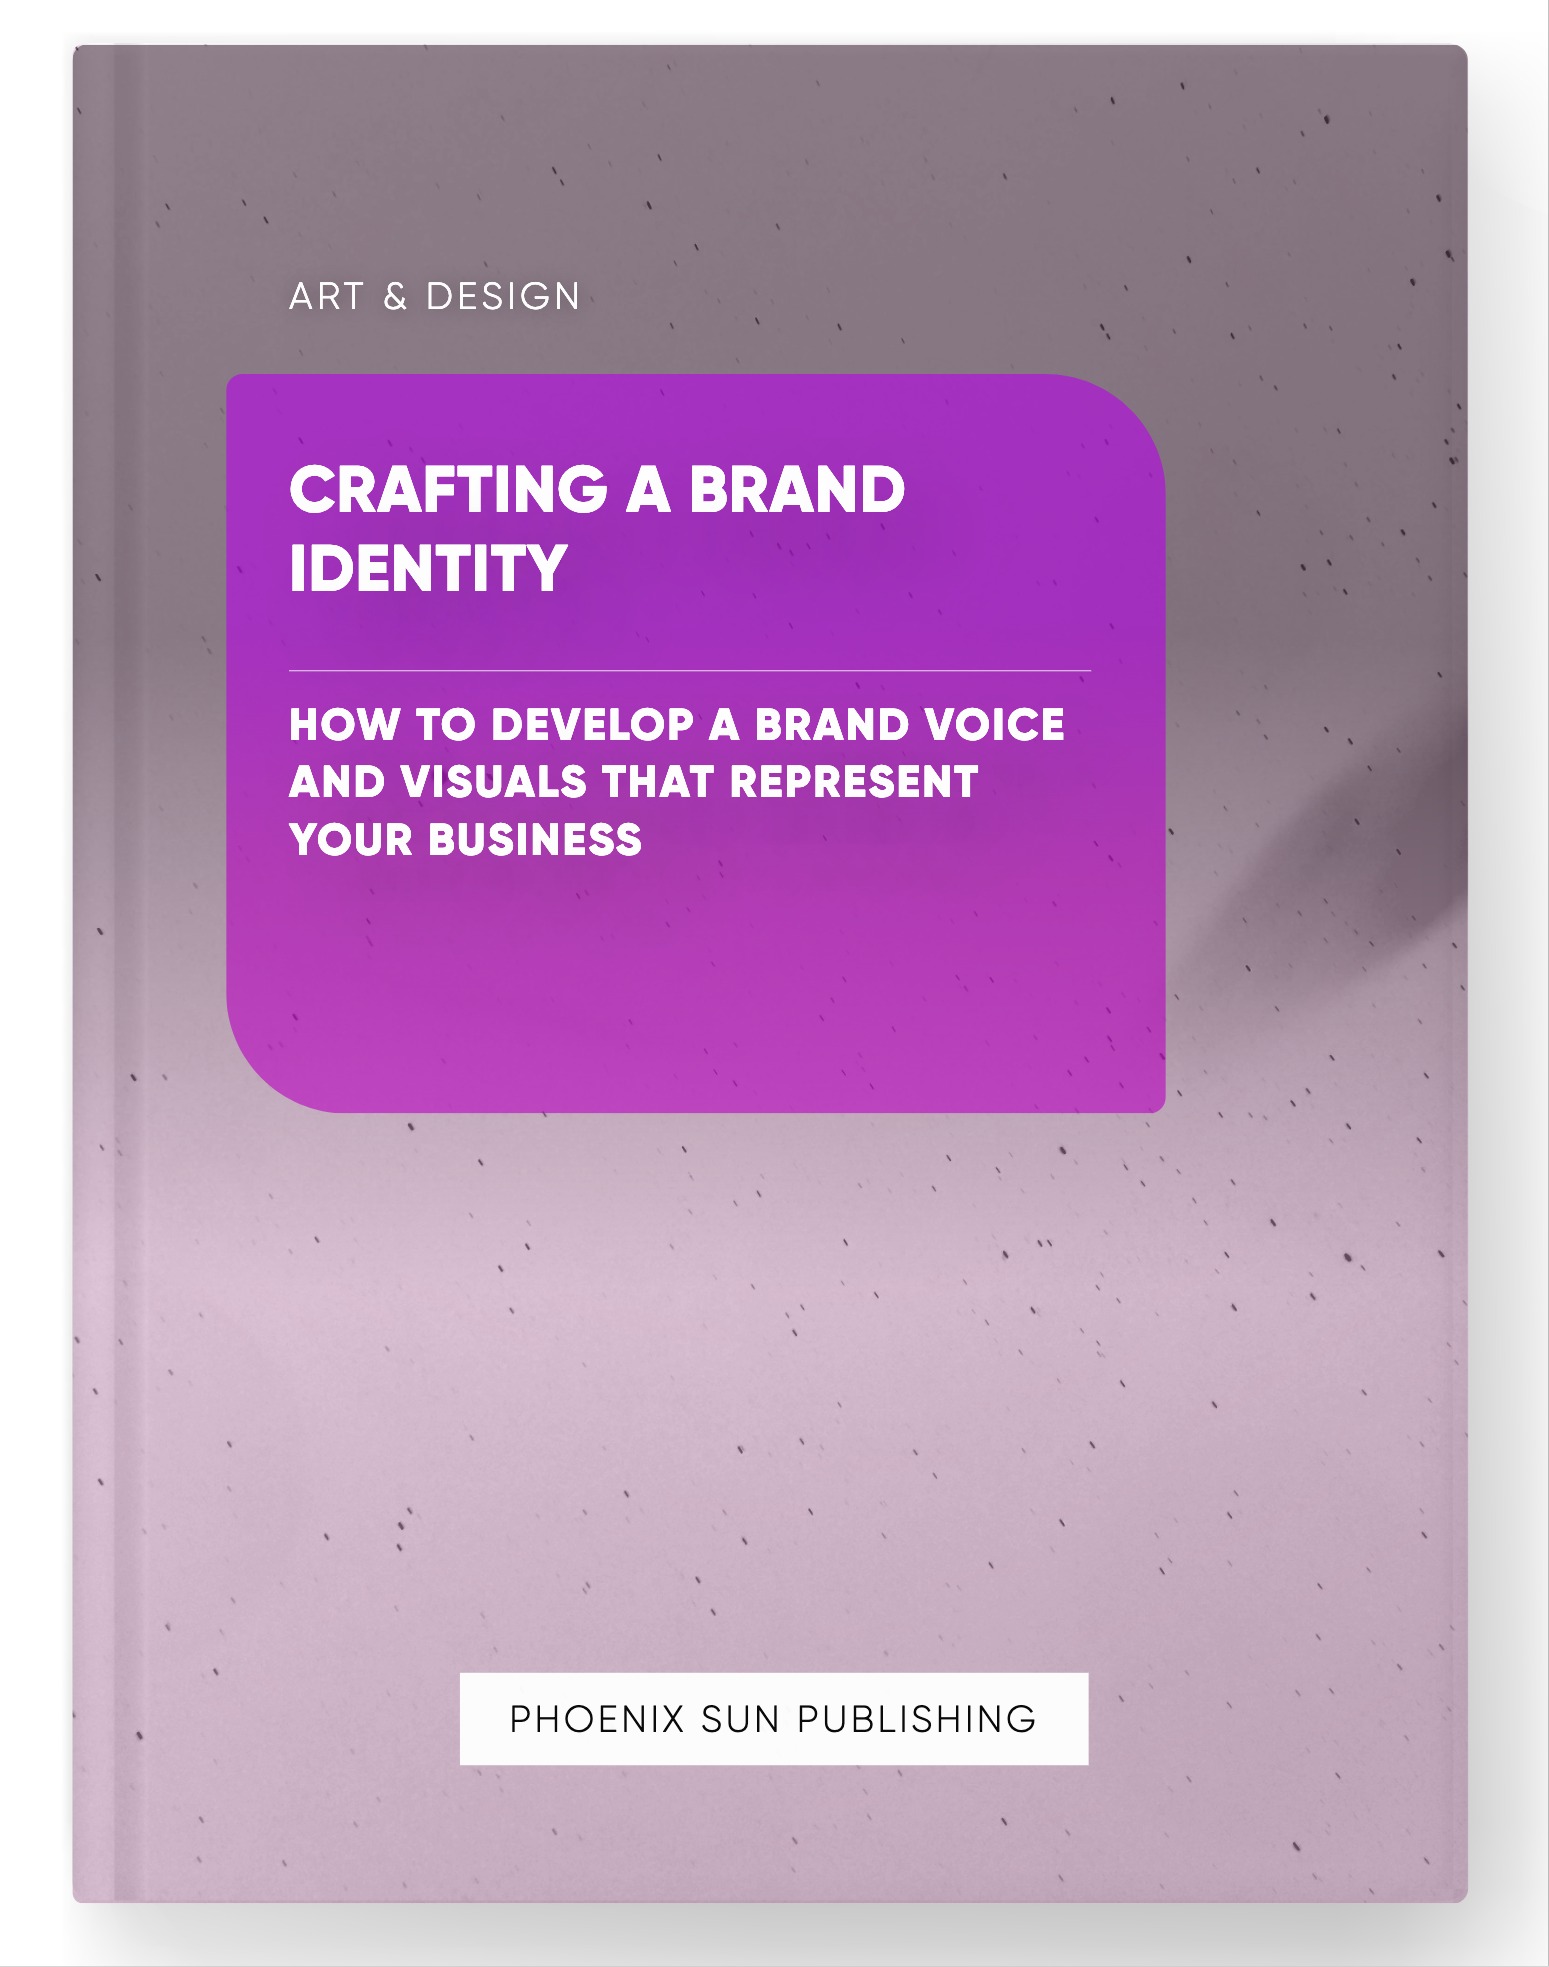 Crafting a Brand Identity – How to Develop a Brand Voice and Visuals that Represent Your Business